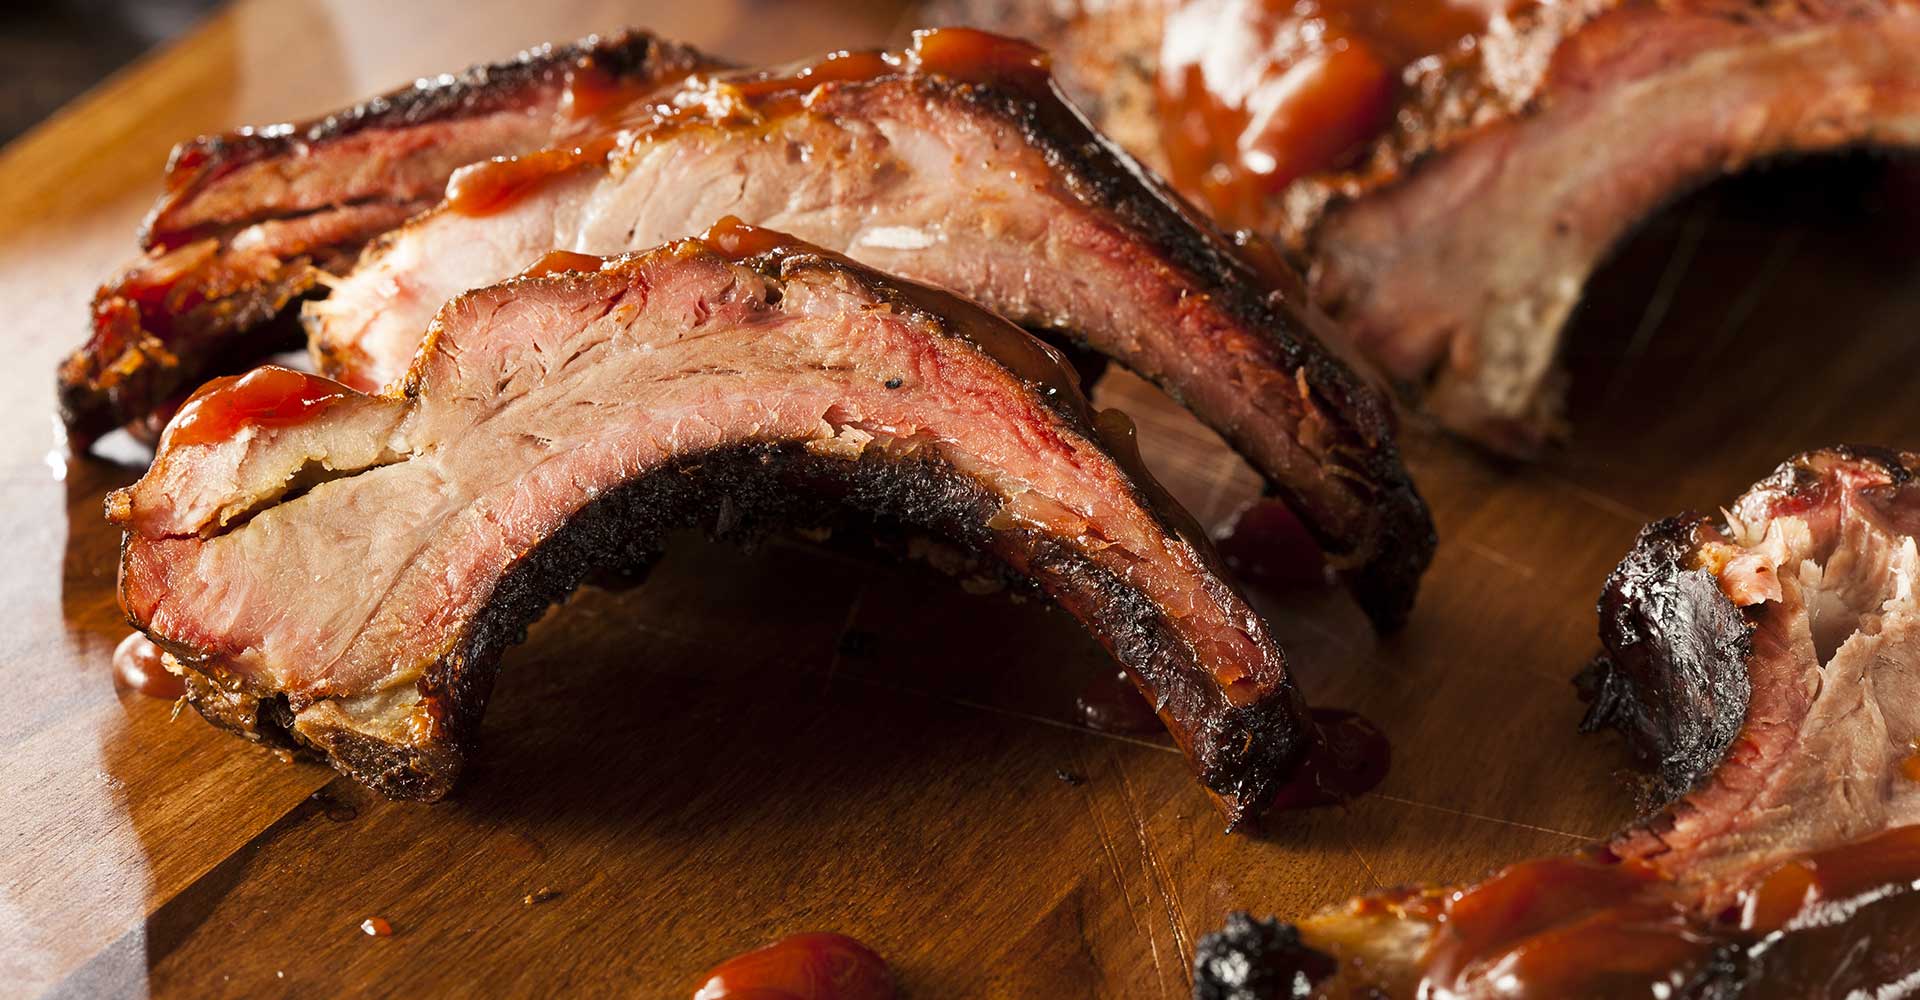 RI BBQ Ribs | Barbecue chicken pulled pork burgers tennessee whiskey